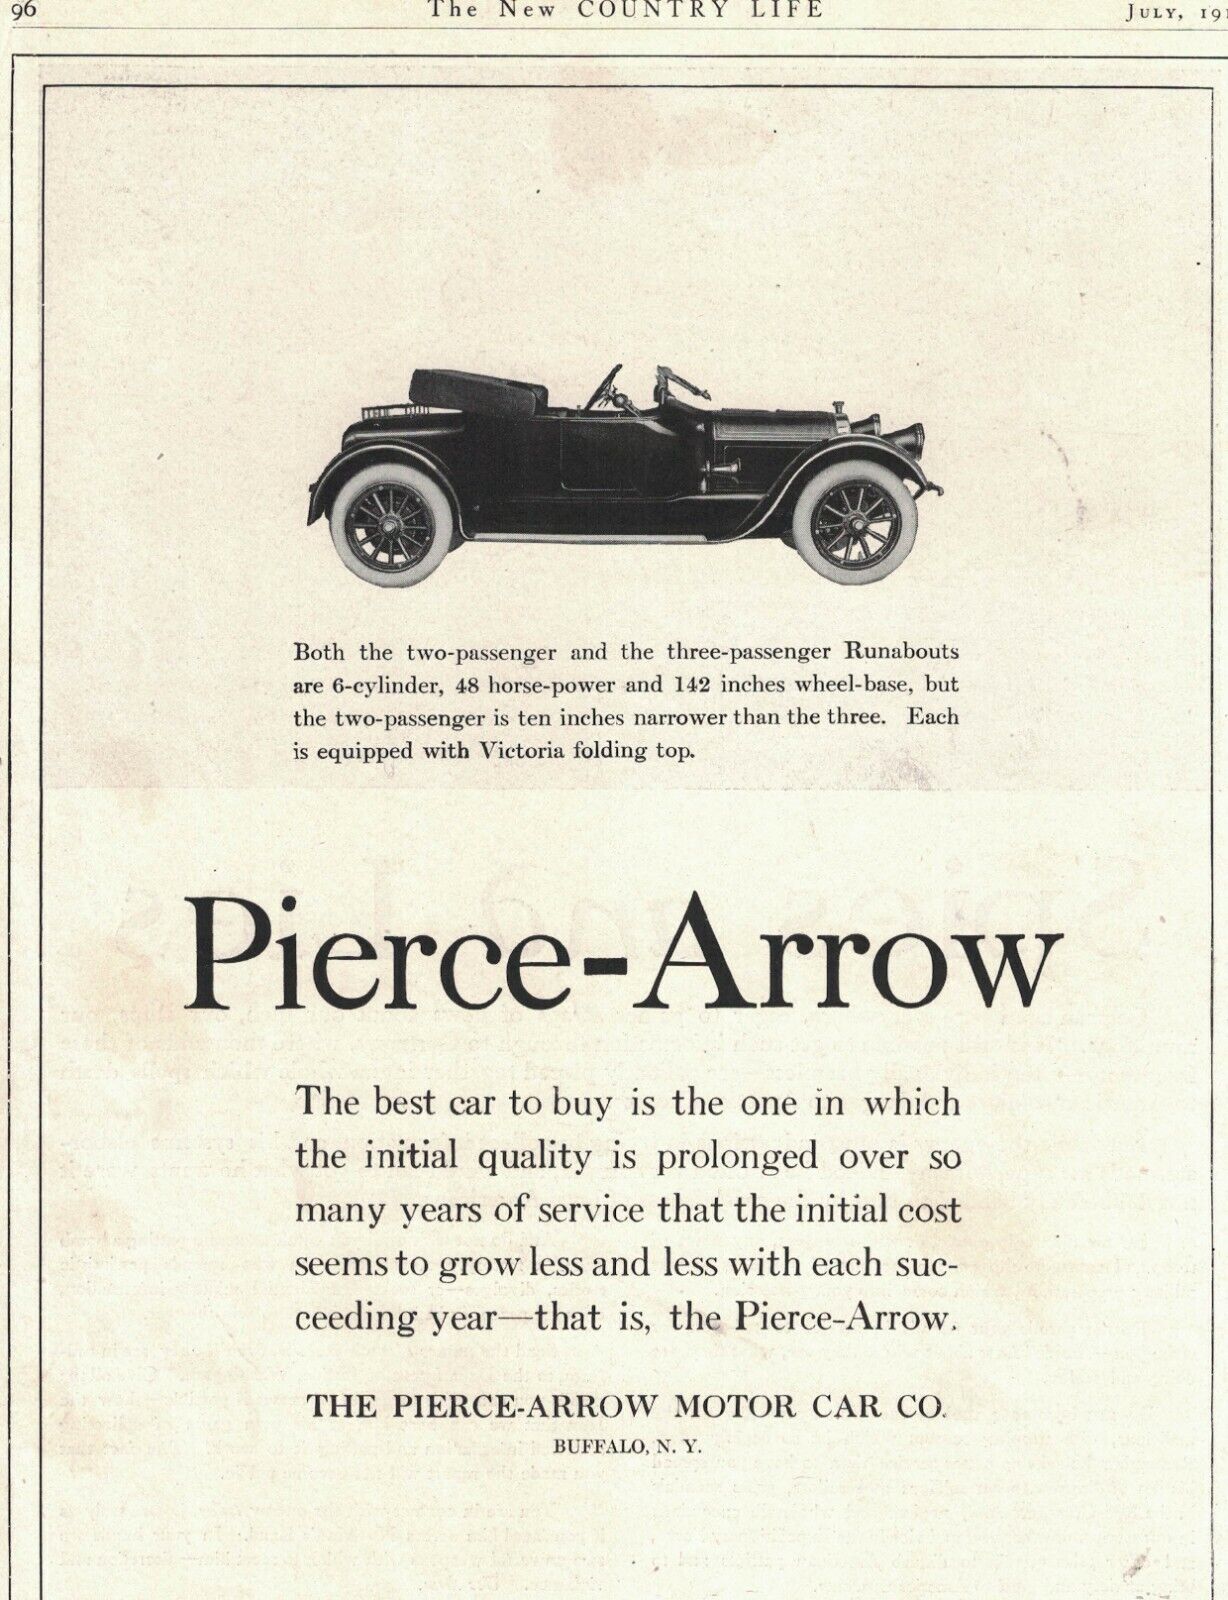 1918 Pierce Arrow Runabout Original ad from Country Life - Rare